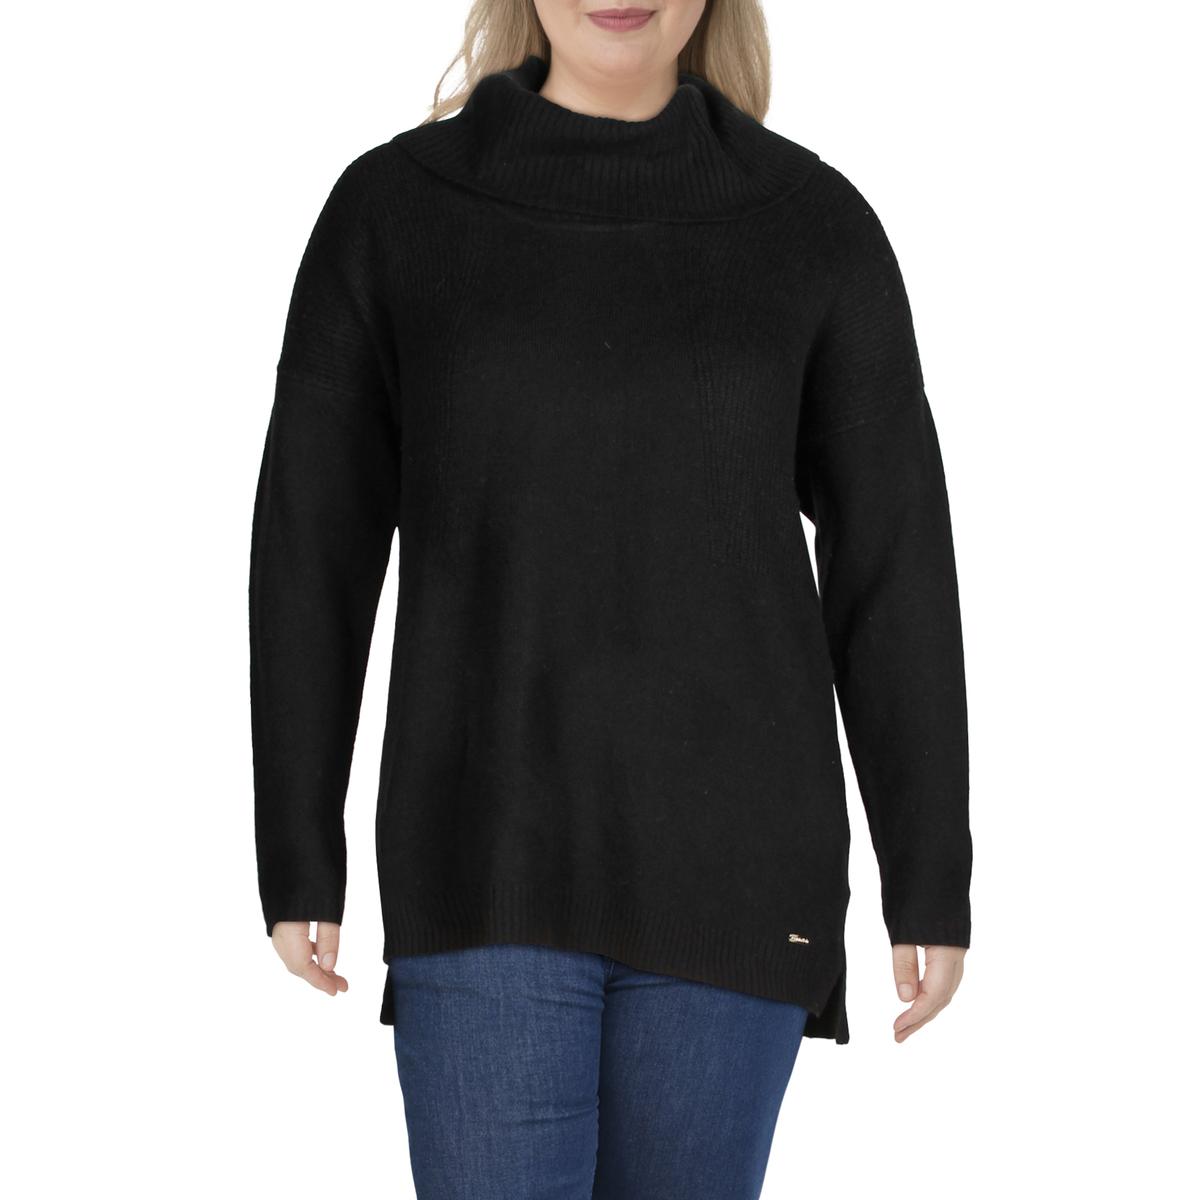 Calvin Klein Womens Black High Low Cowl Neck Top Pullover Sweater 